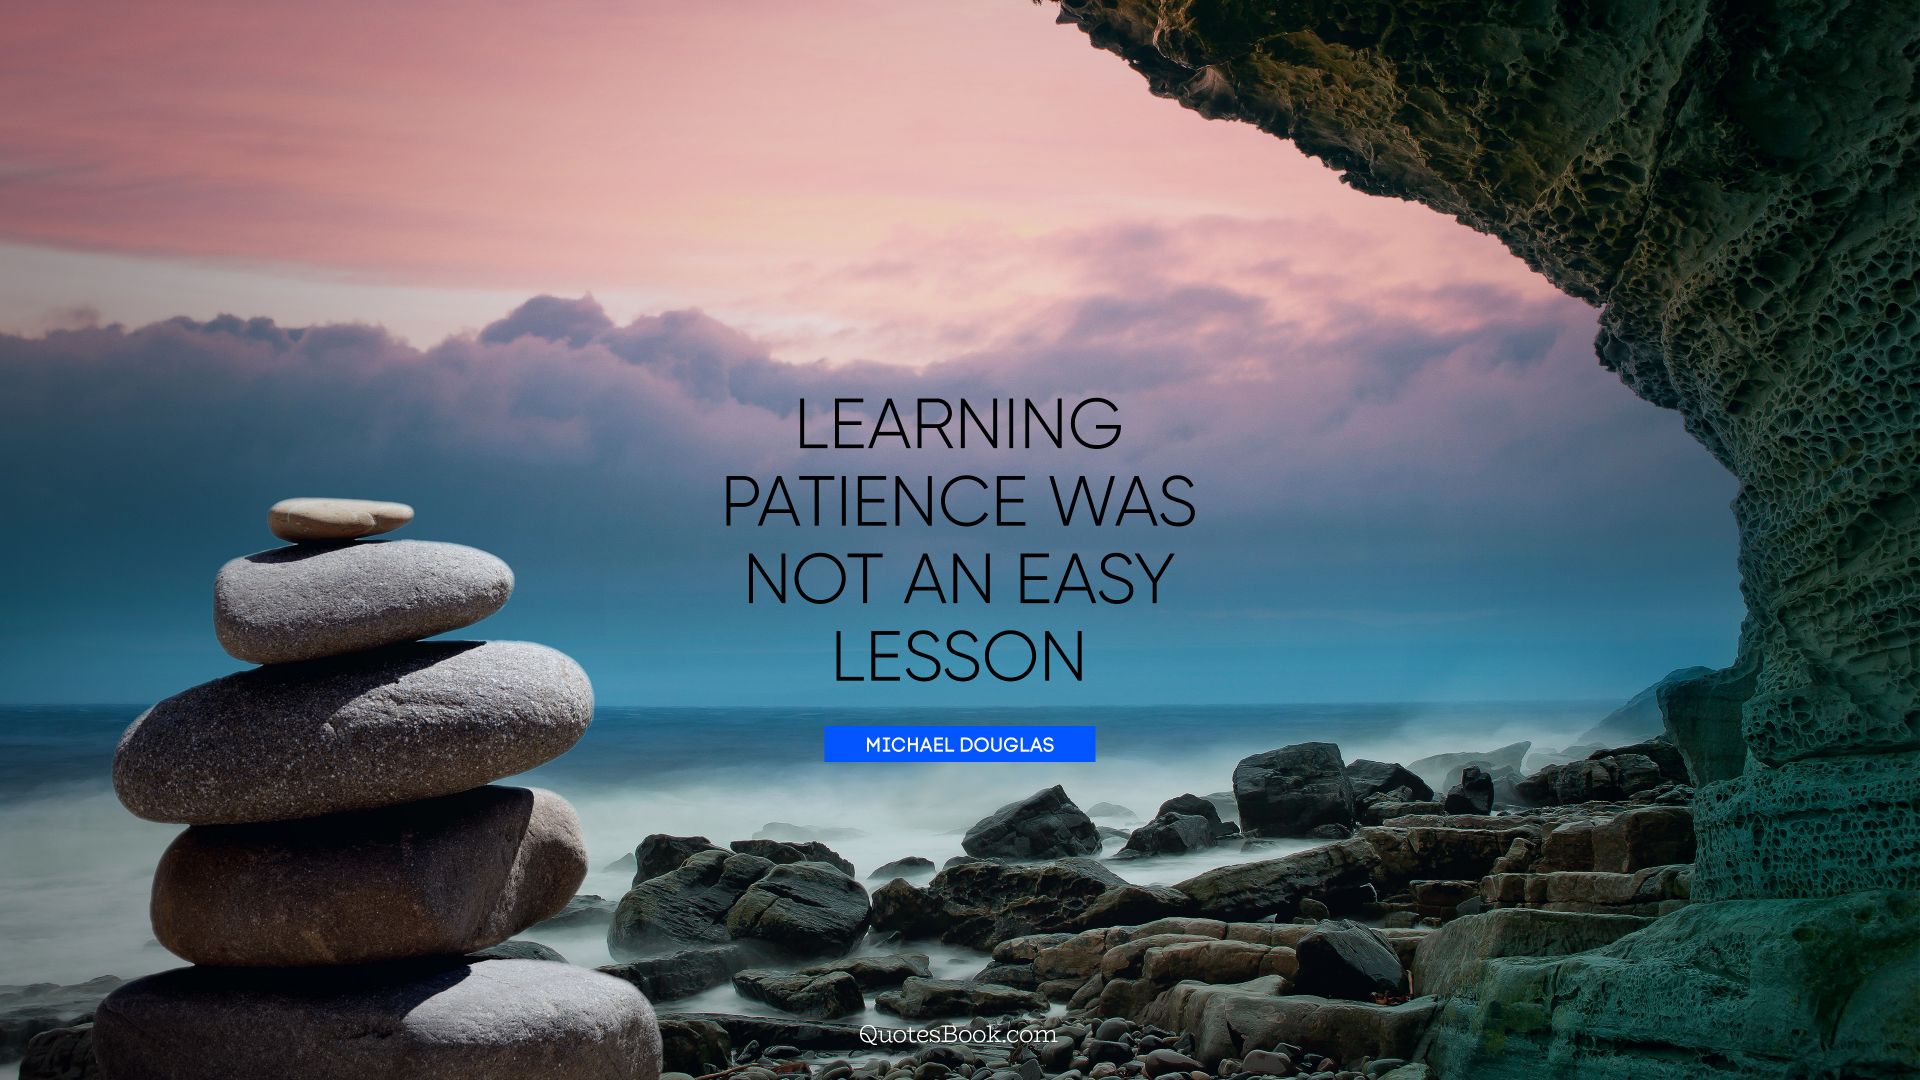 Learning patience was not an easy lesson. - Quote by Michael Douglas